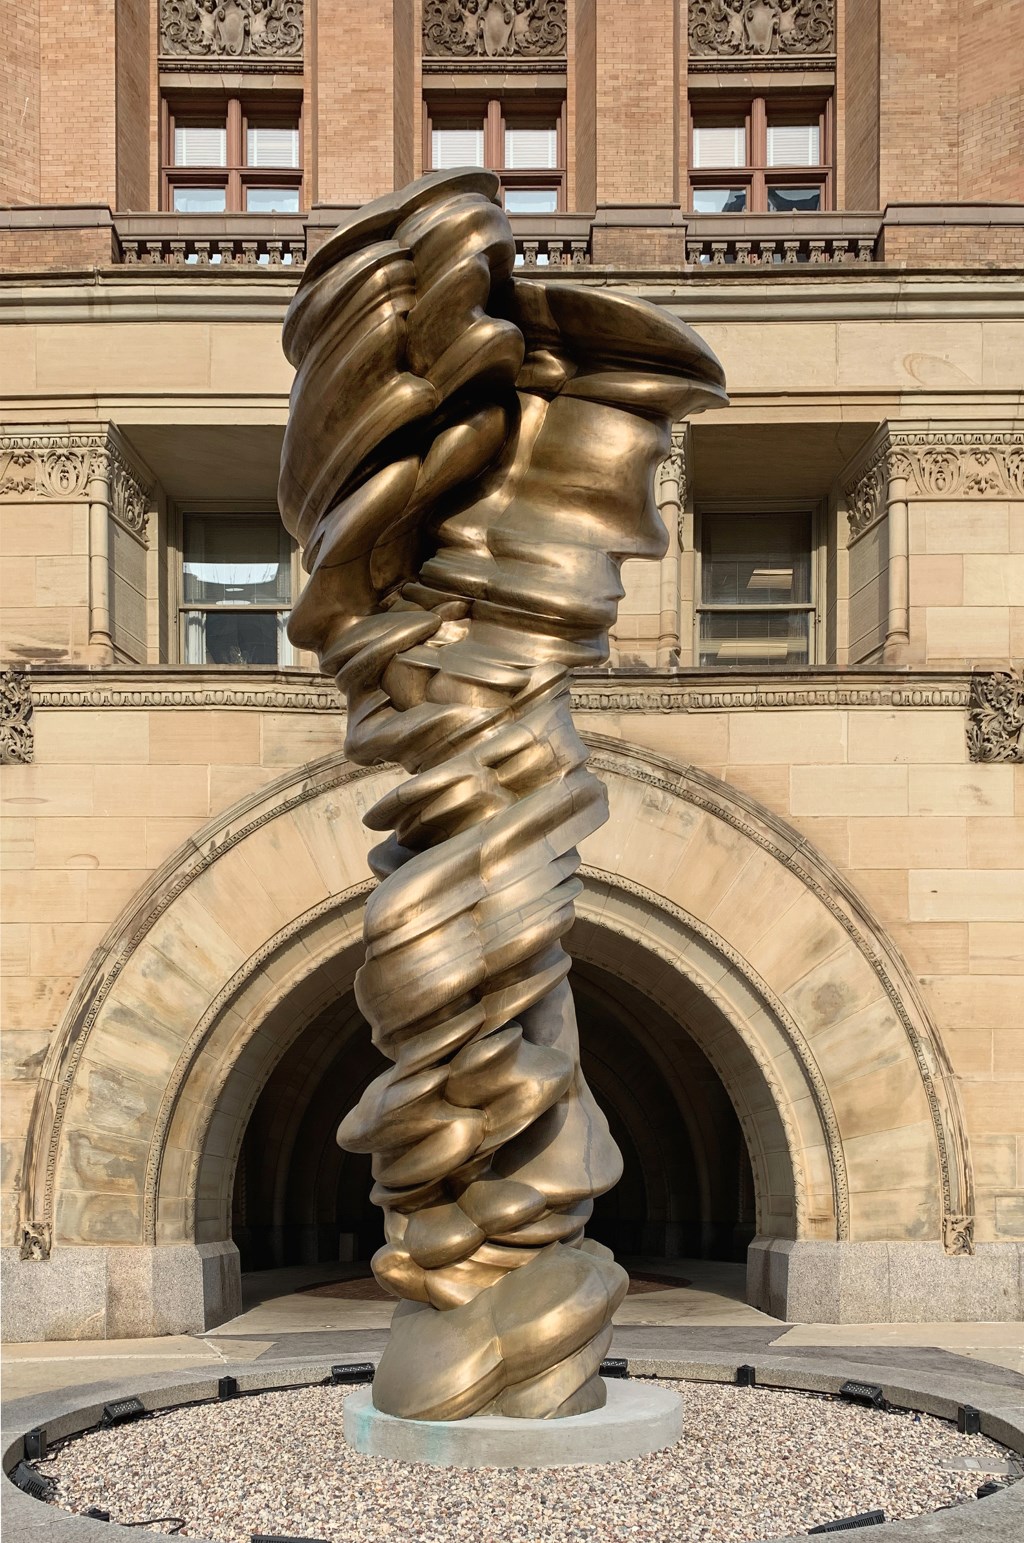 “Mixed Feelings” by Tony Cragg. Photo by Tom Bamberger. 